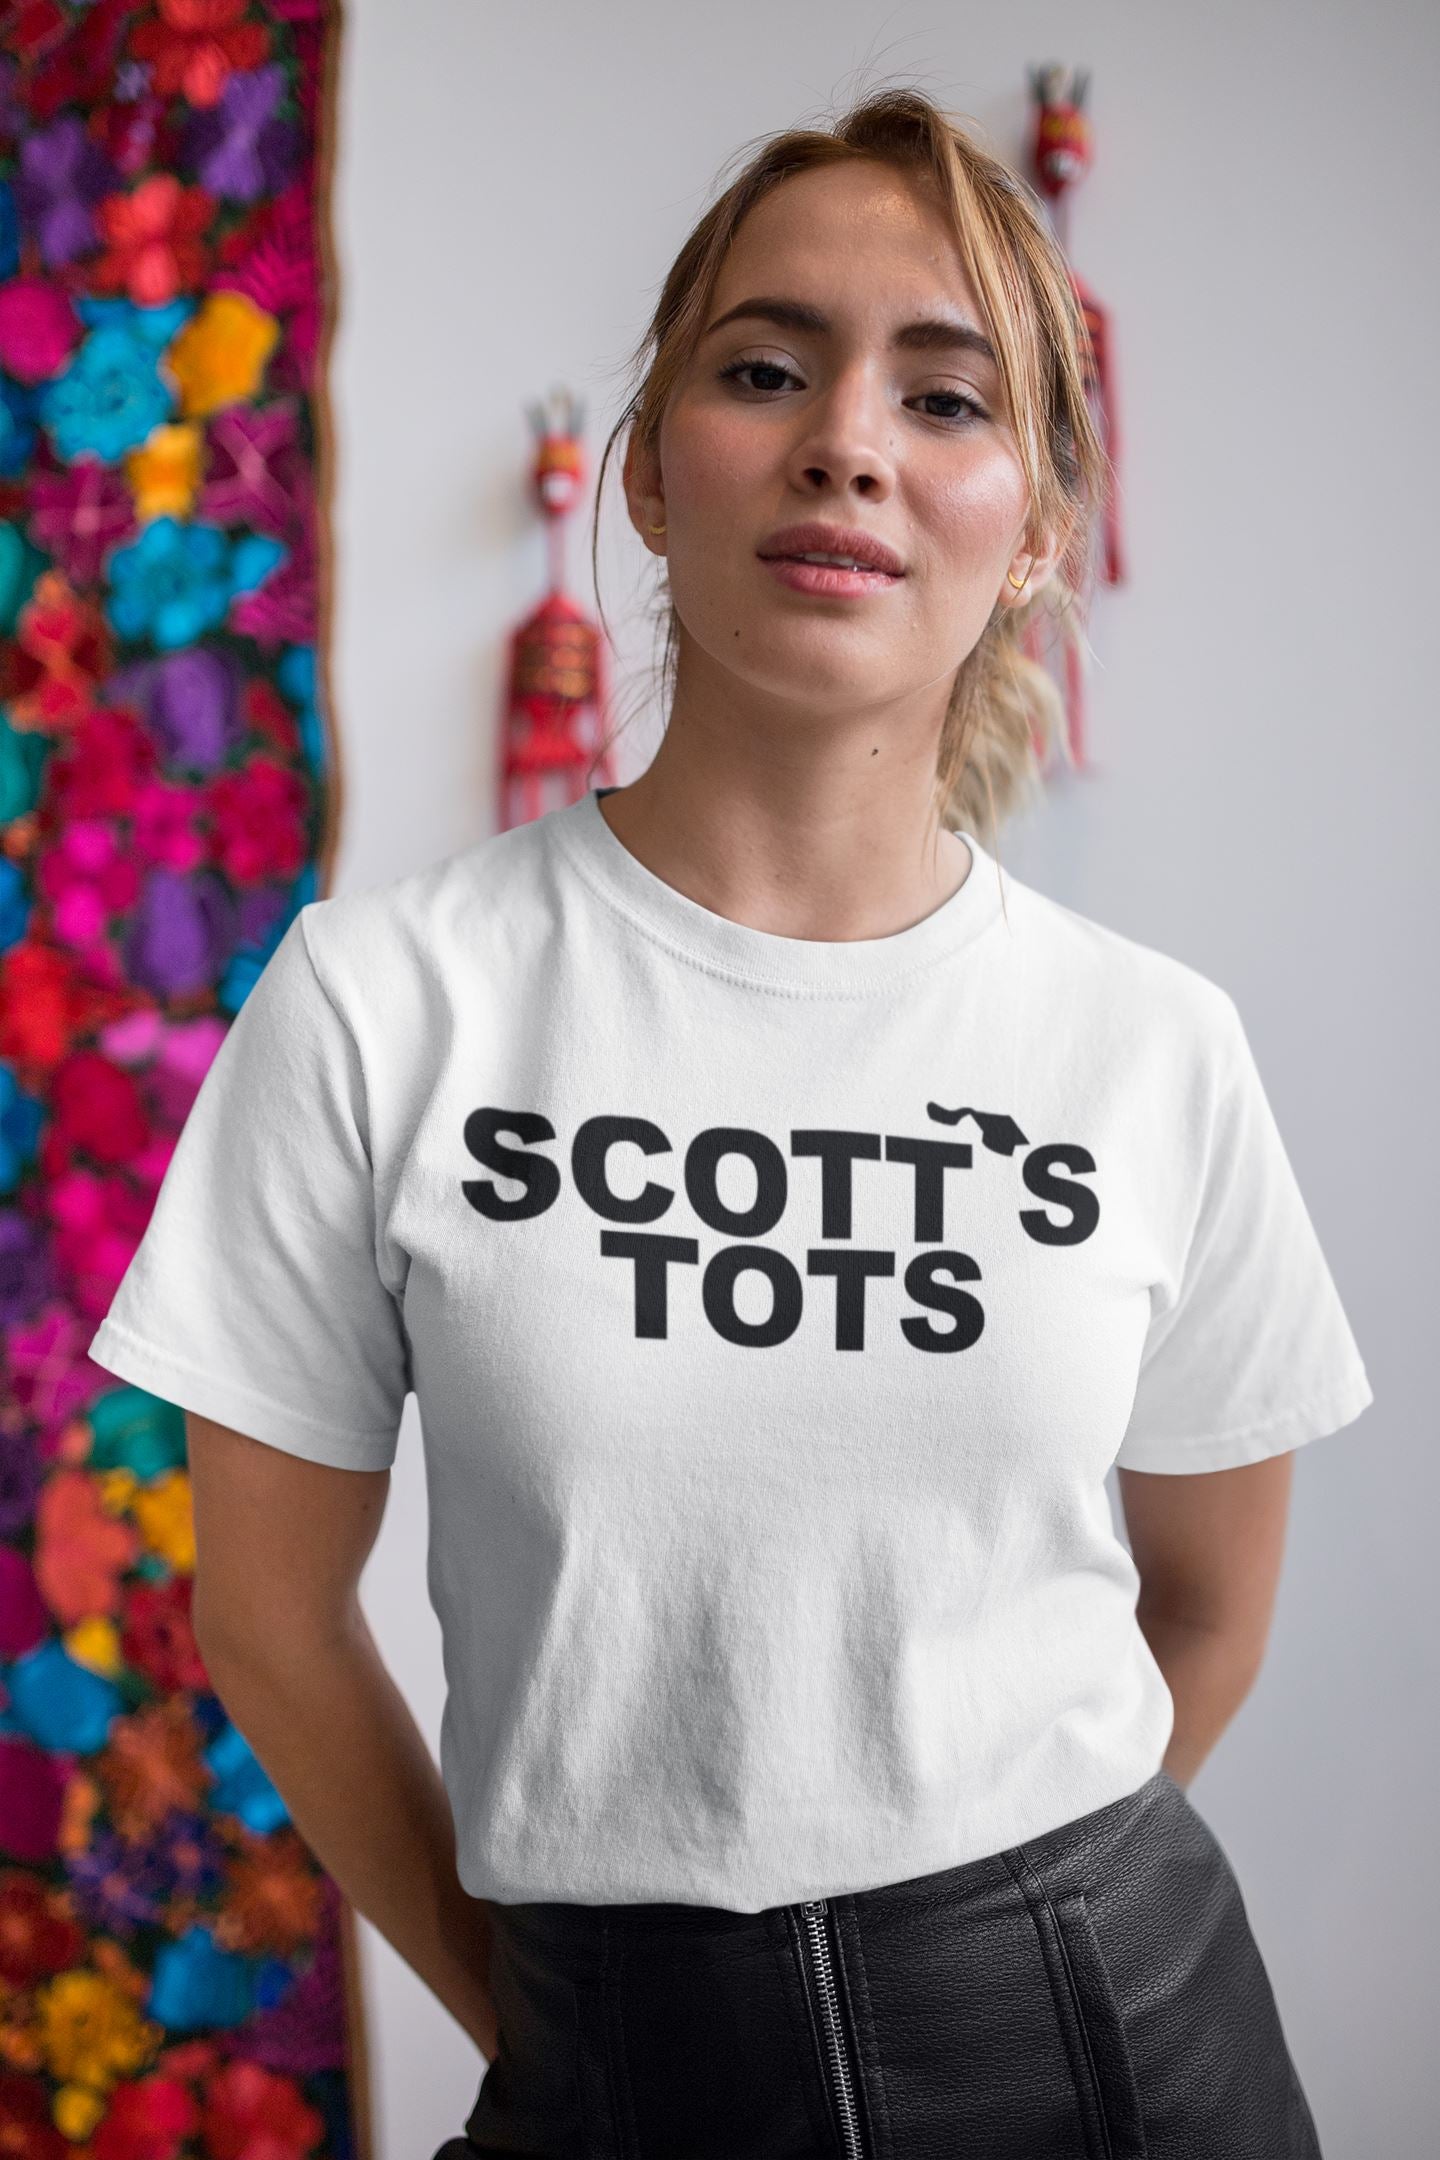 Scott's Tots Official White T Shirt for Men and Women freeshipping - Catch My Drift India